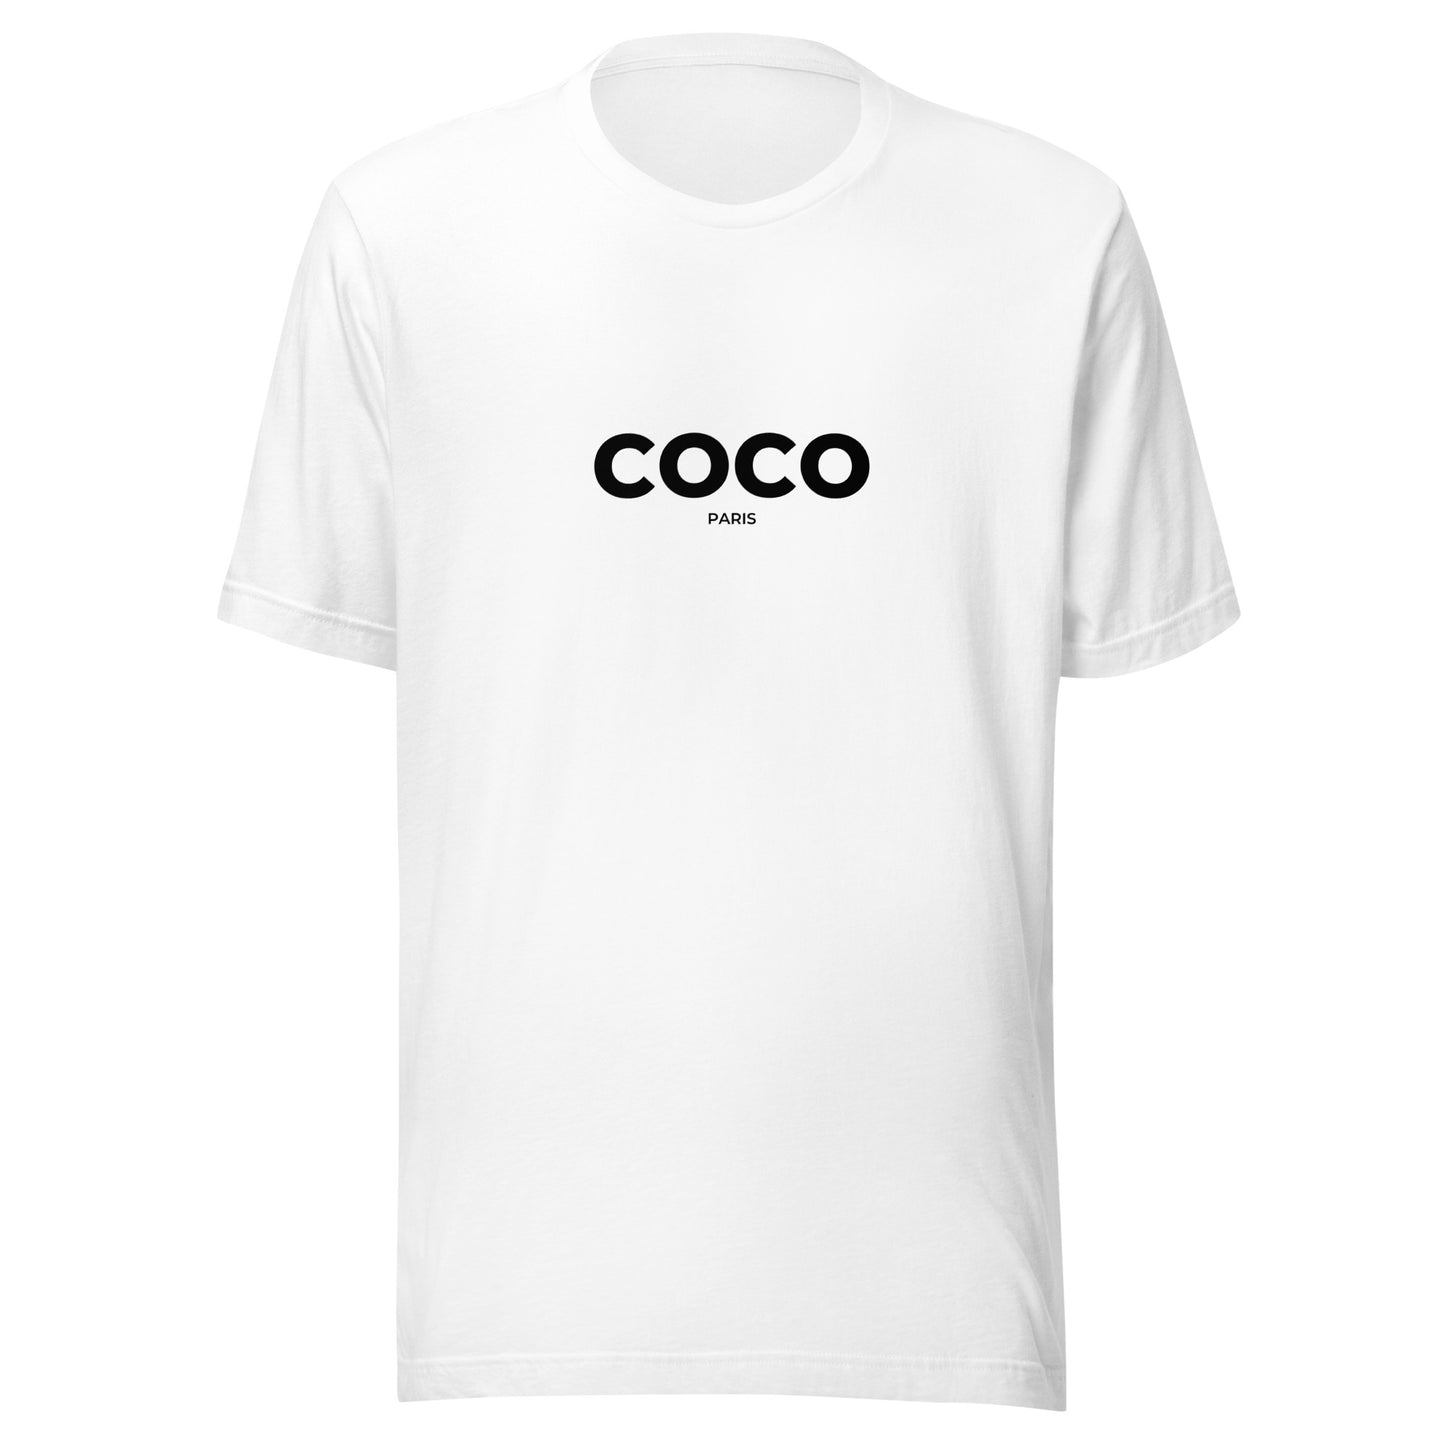 Coco T-Shirt | Art in Aging